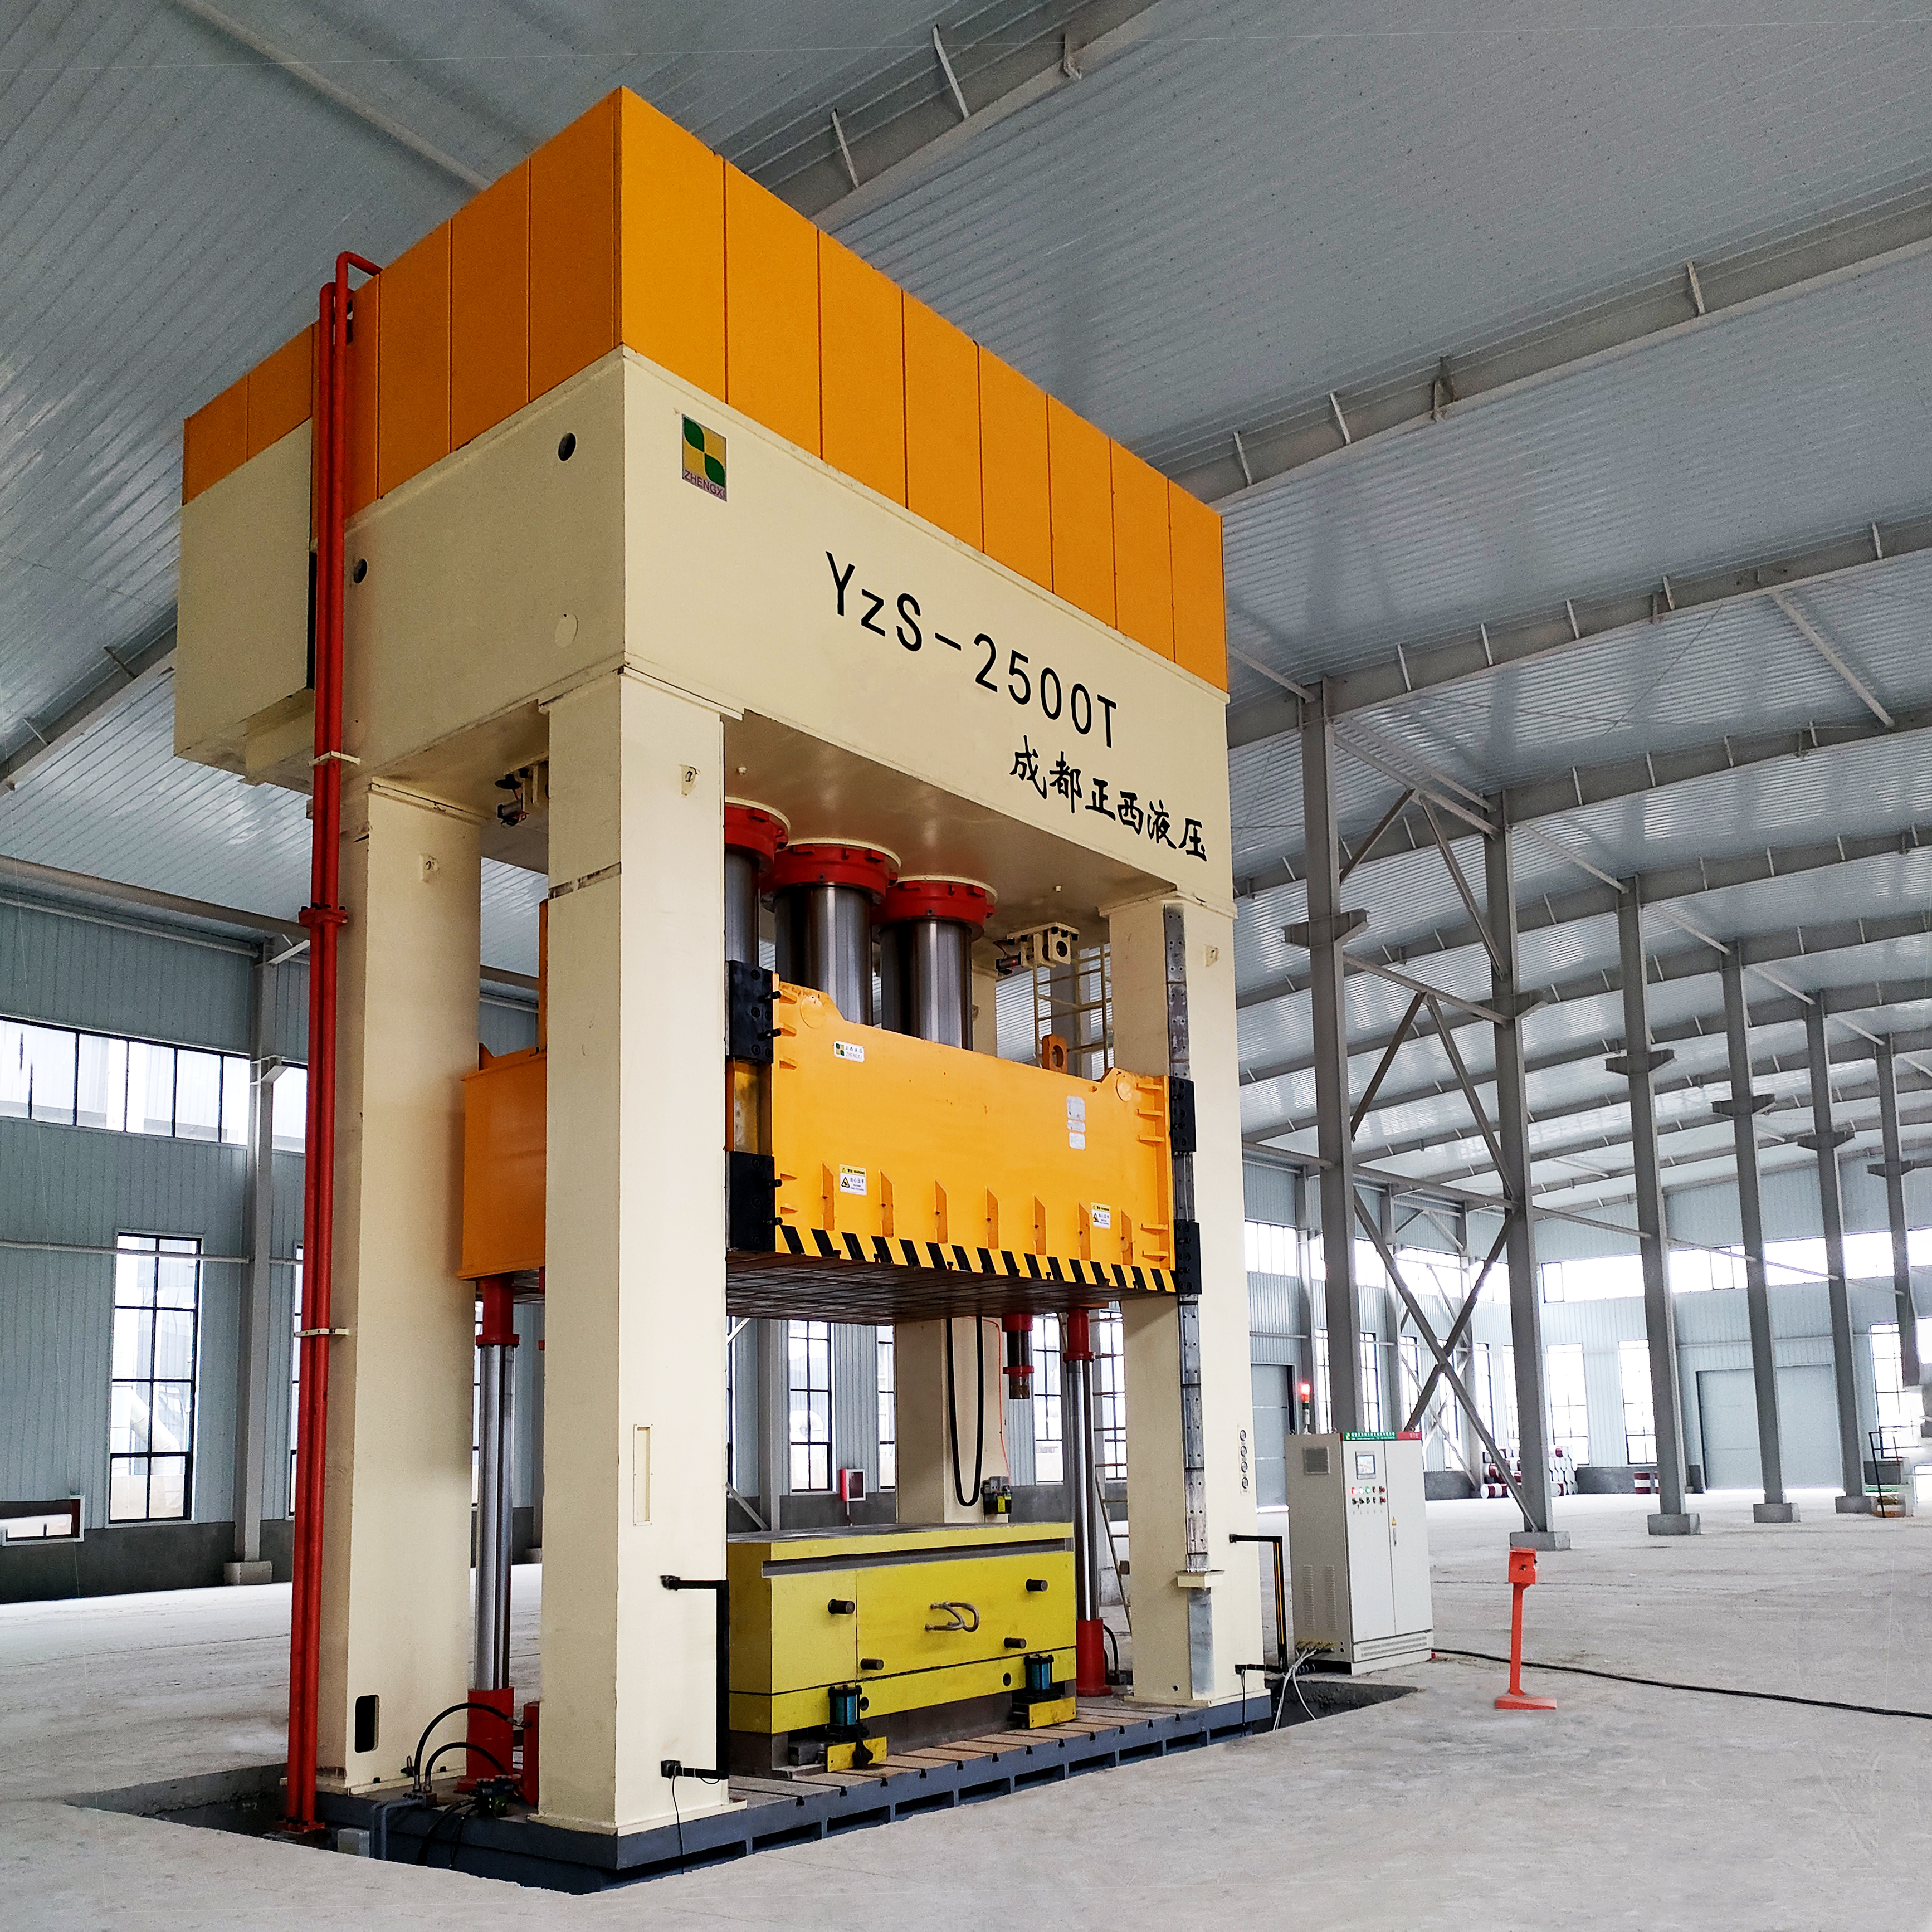 One of Hottest for Bmc Compound Hydraulic Press - 2500T H-frame Hydraulic Press For Composites SMC/BMC/GRP/FRP/GMT Molding  – Zhengxi